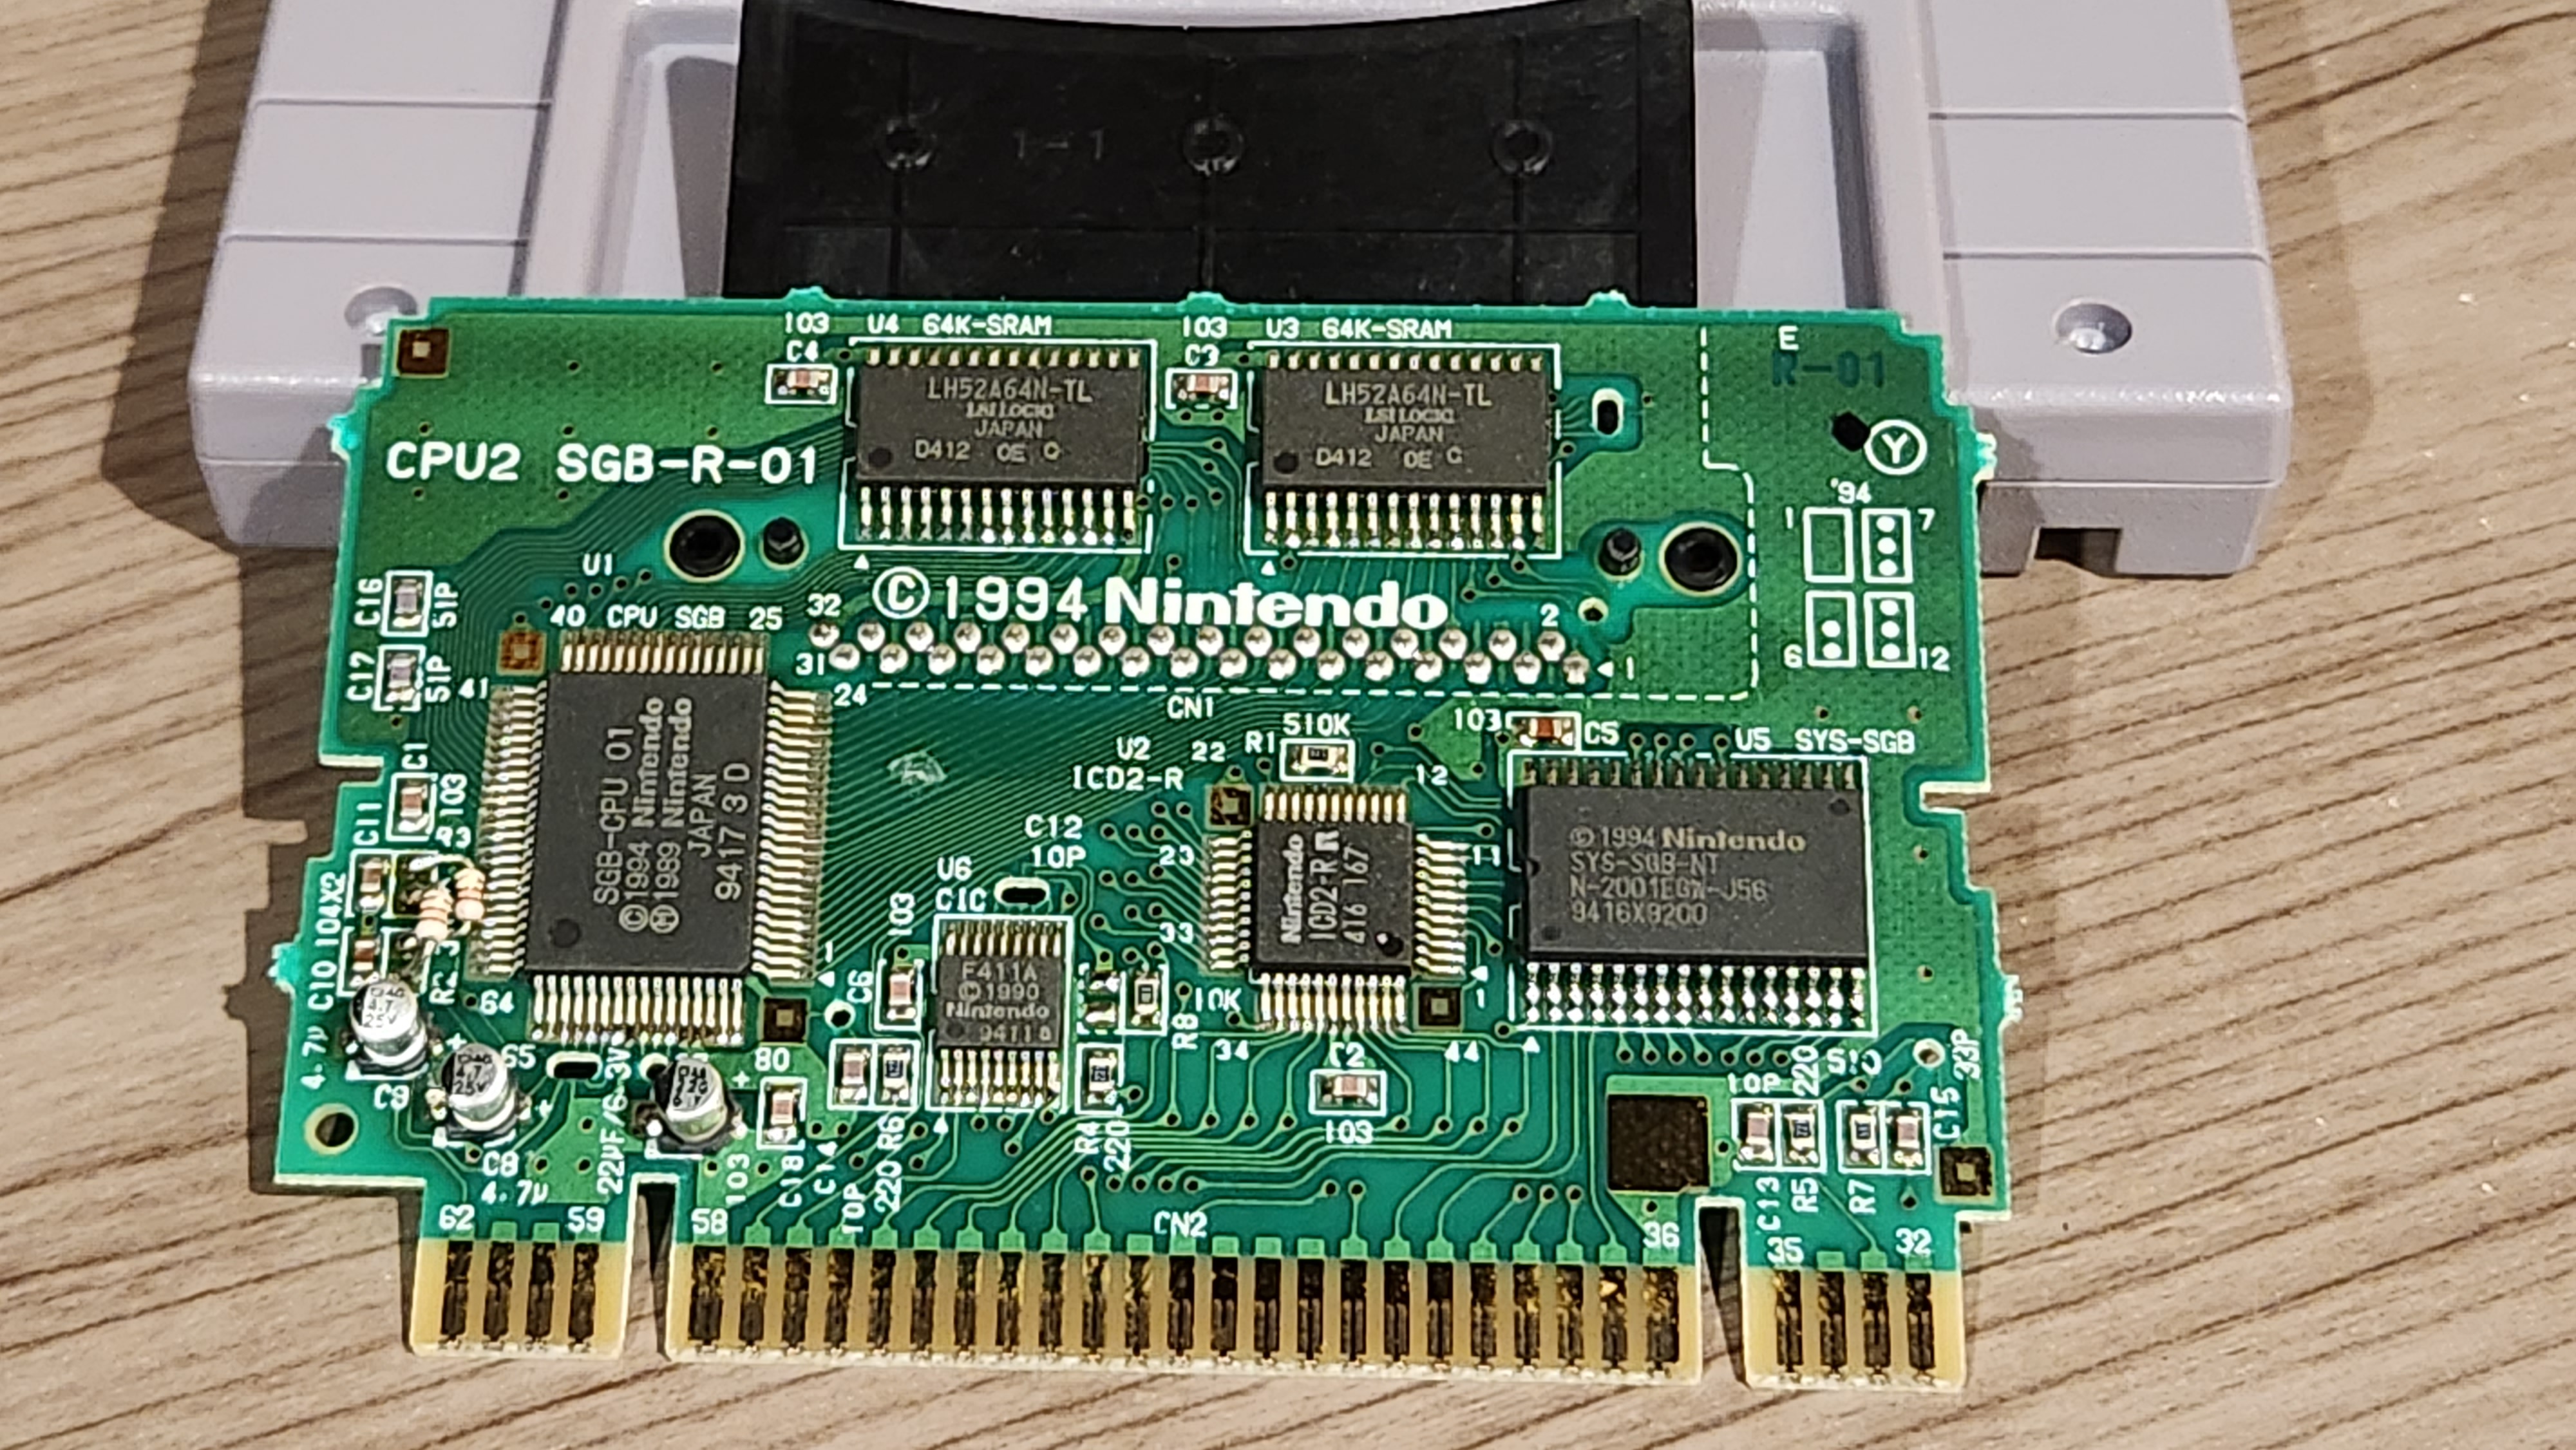 The internals of the Super Game Boy